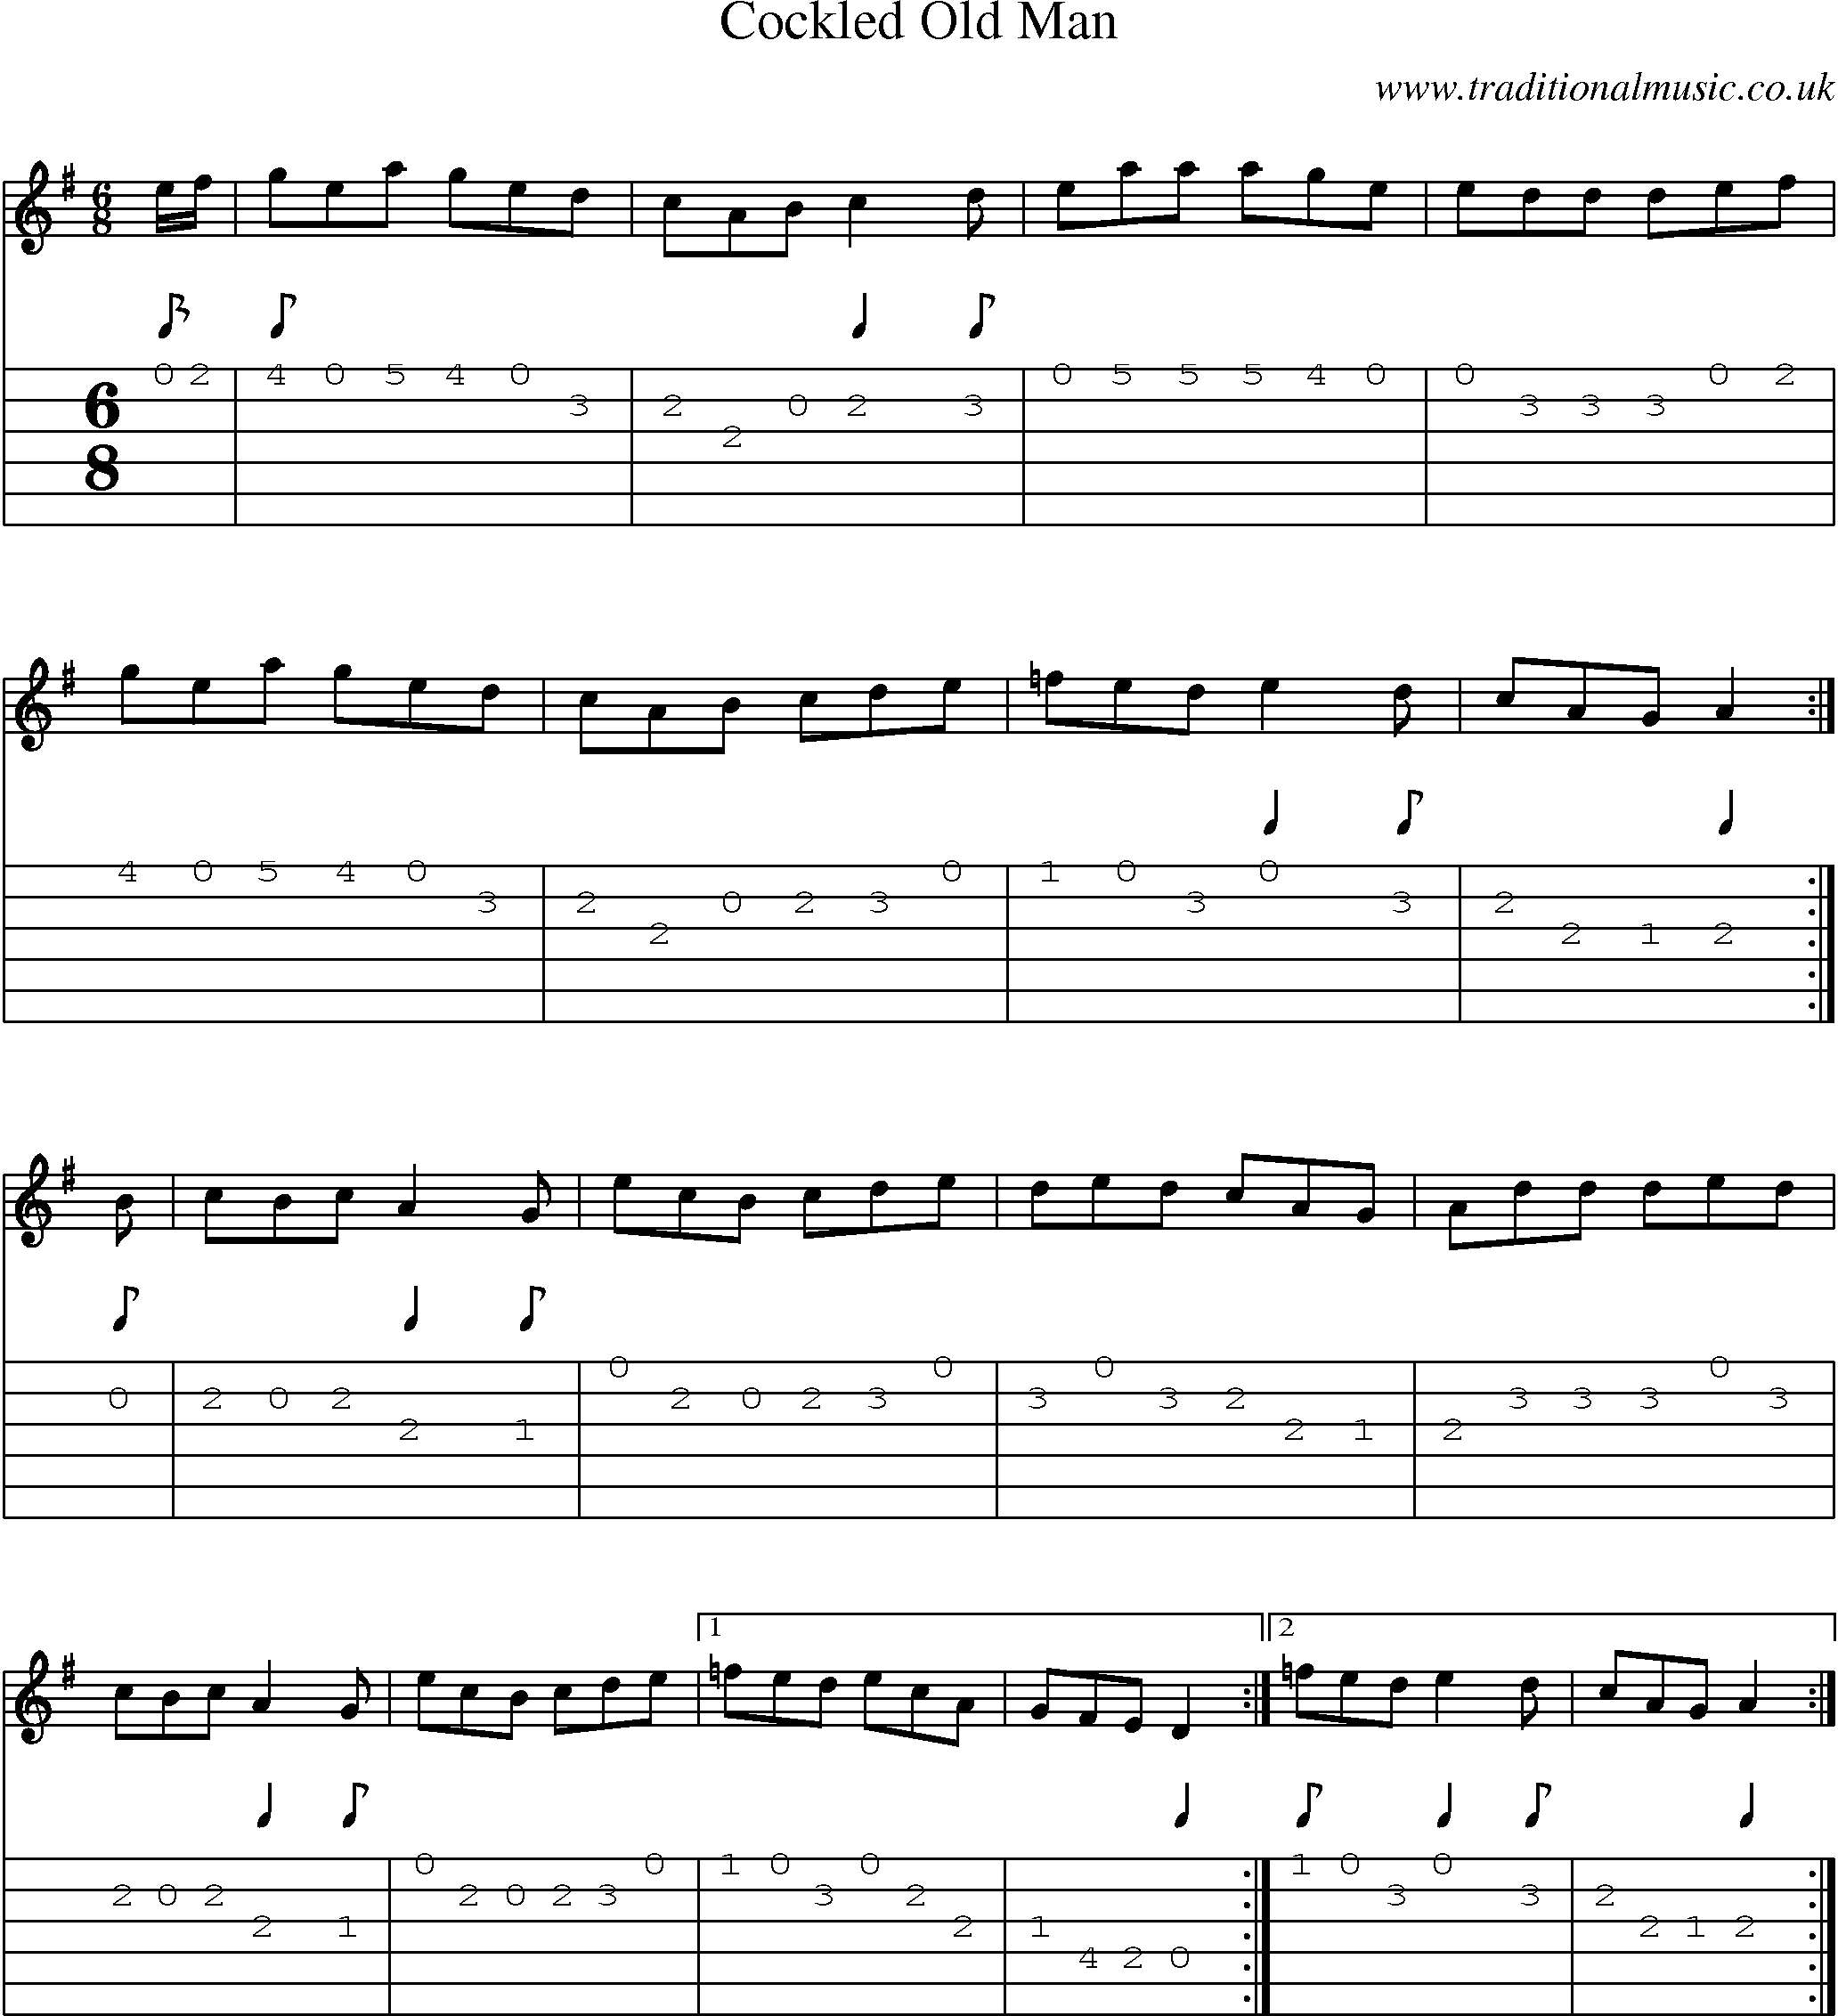 Music Score and Guitar Tabs for Cockled Old Man